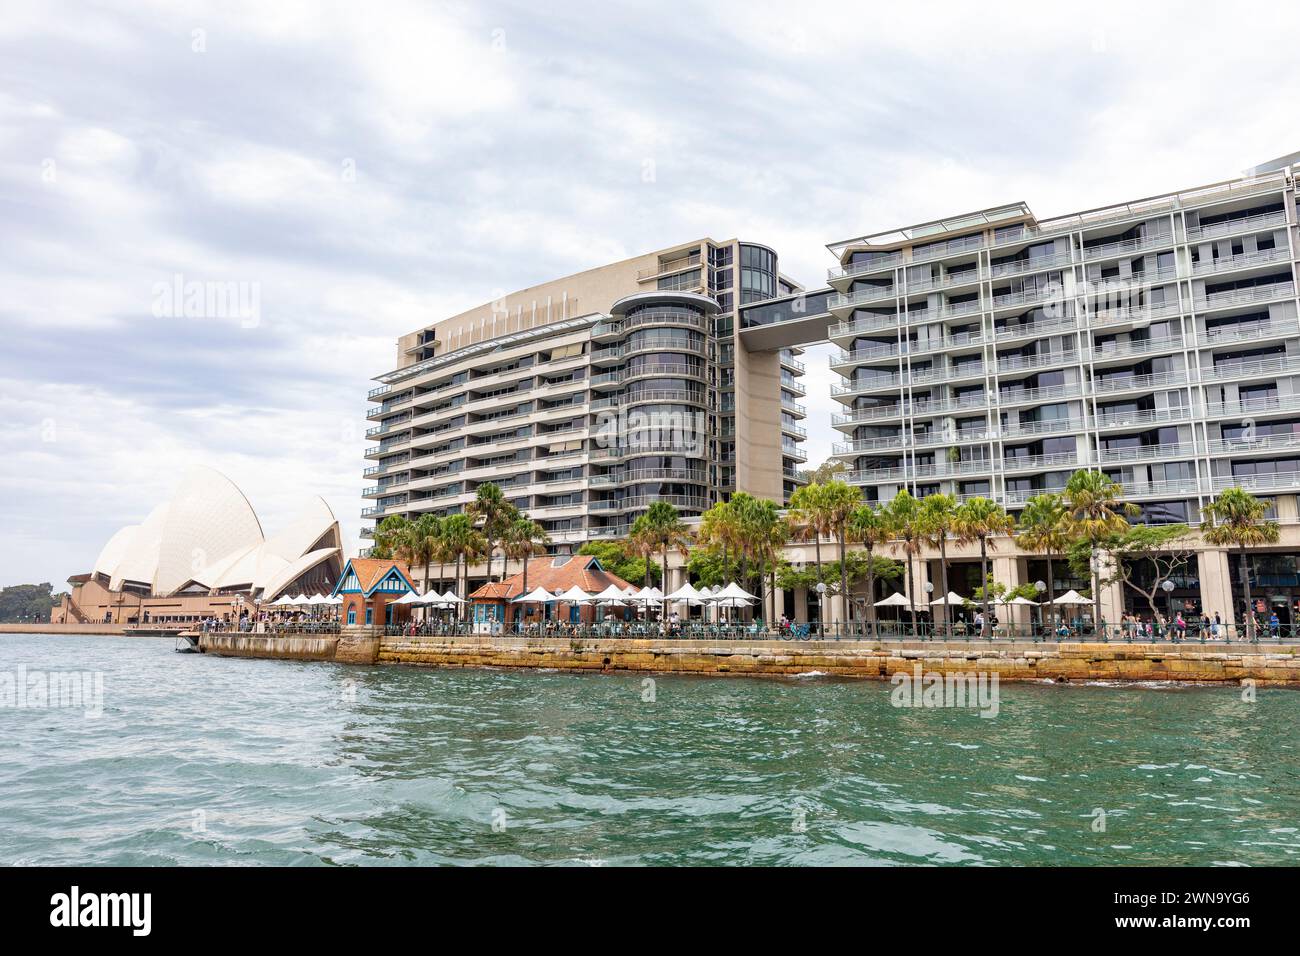 Circular Quay Sydney,  Bennelong apartments, the toaster building, residential apartments flats in Sydney city centre with harbour views,Australia Stock Photo